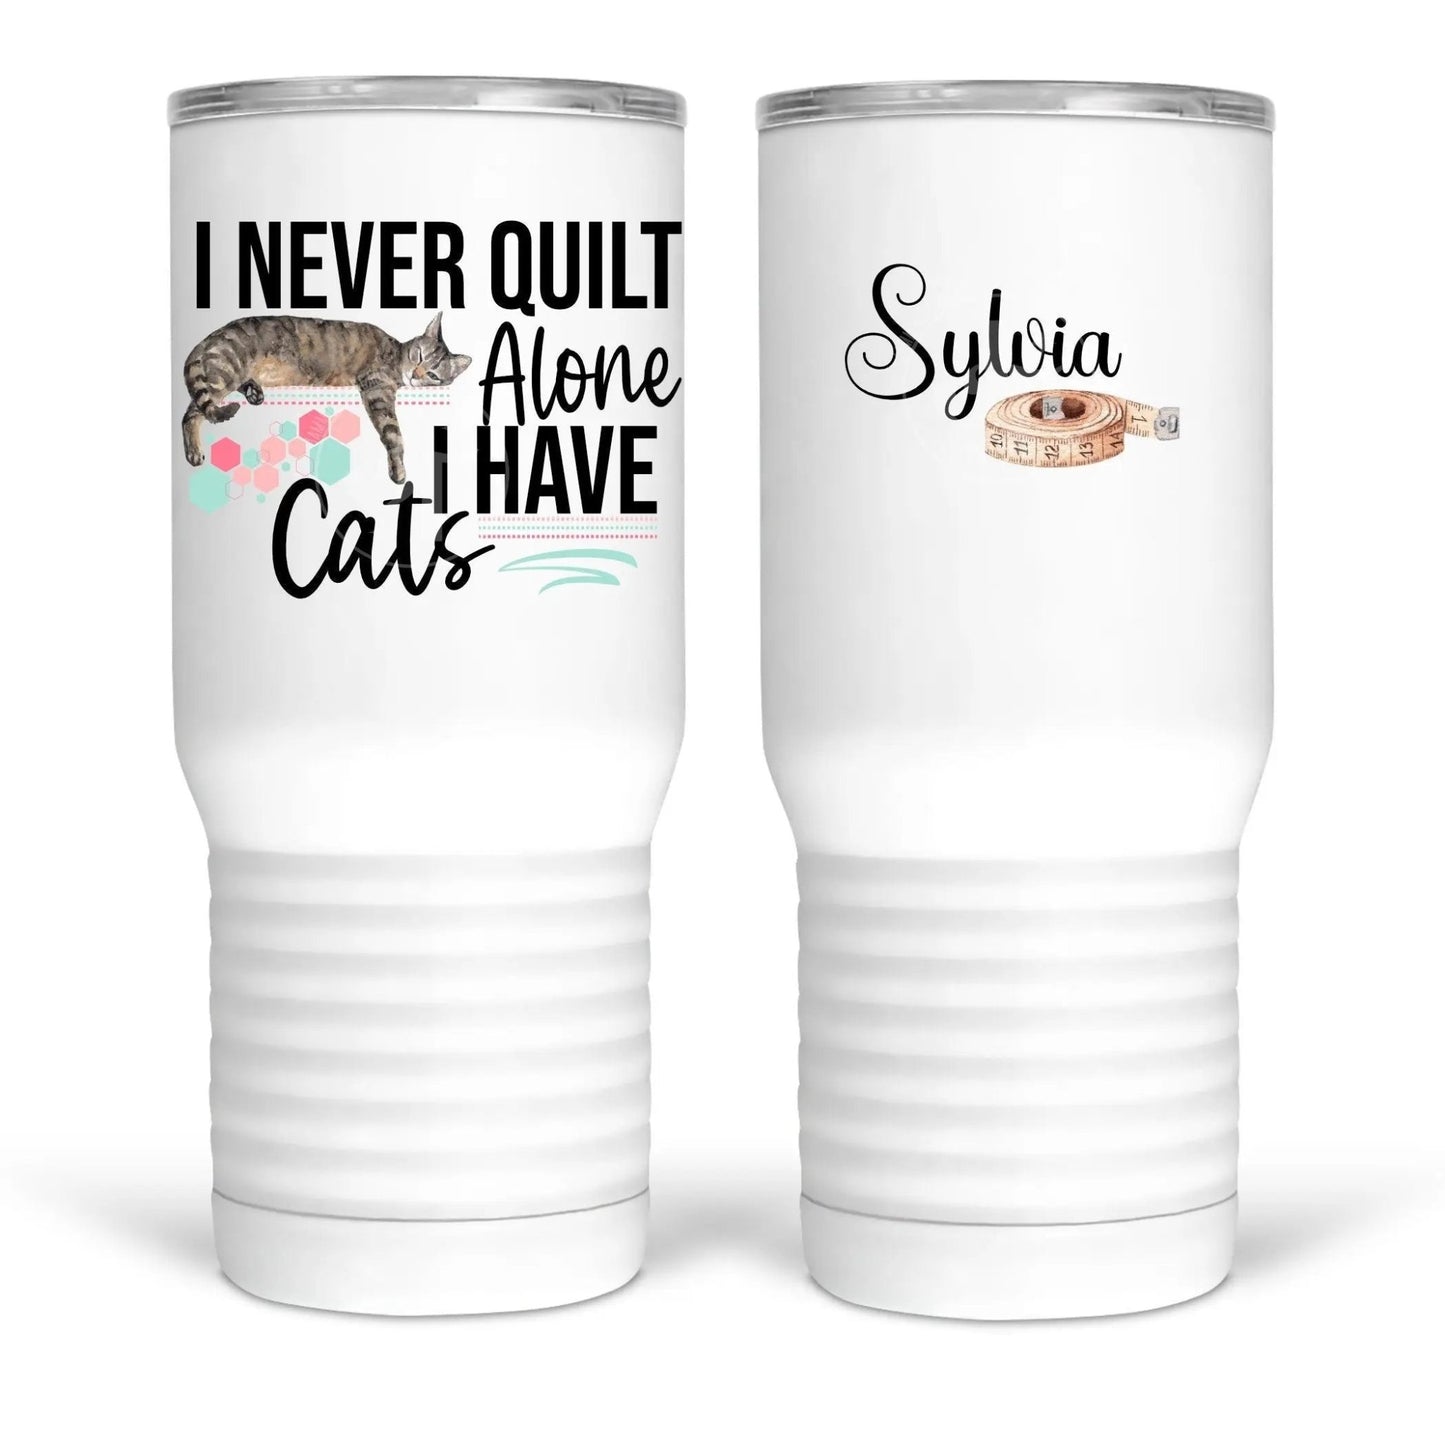 I Never Quilt Alone, I have cats!  Mugs and tumblers for quilters with a feline assistant! - Jammin Threads